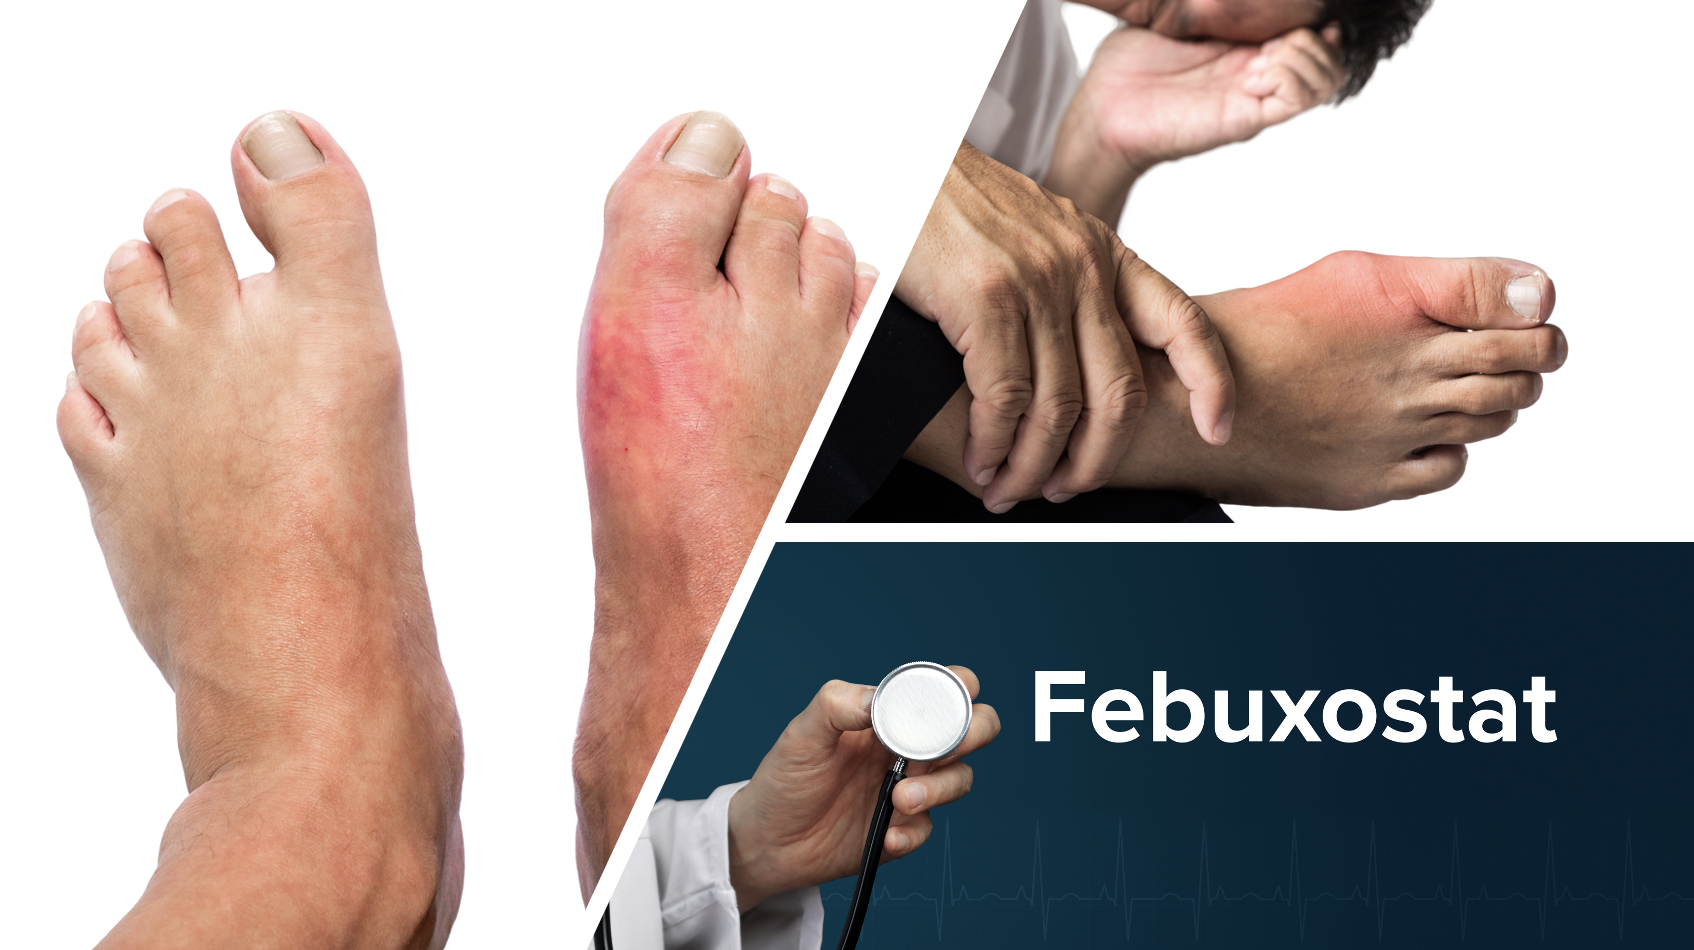 Initiation of Febuxostat Does Not Prolong Acute Gout Flares